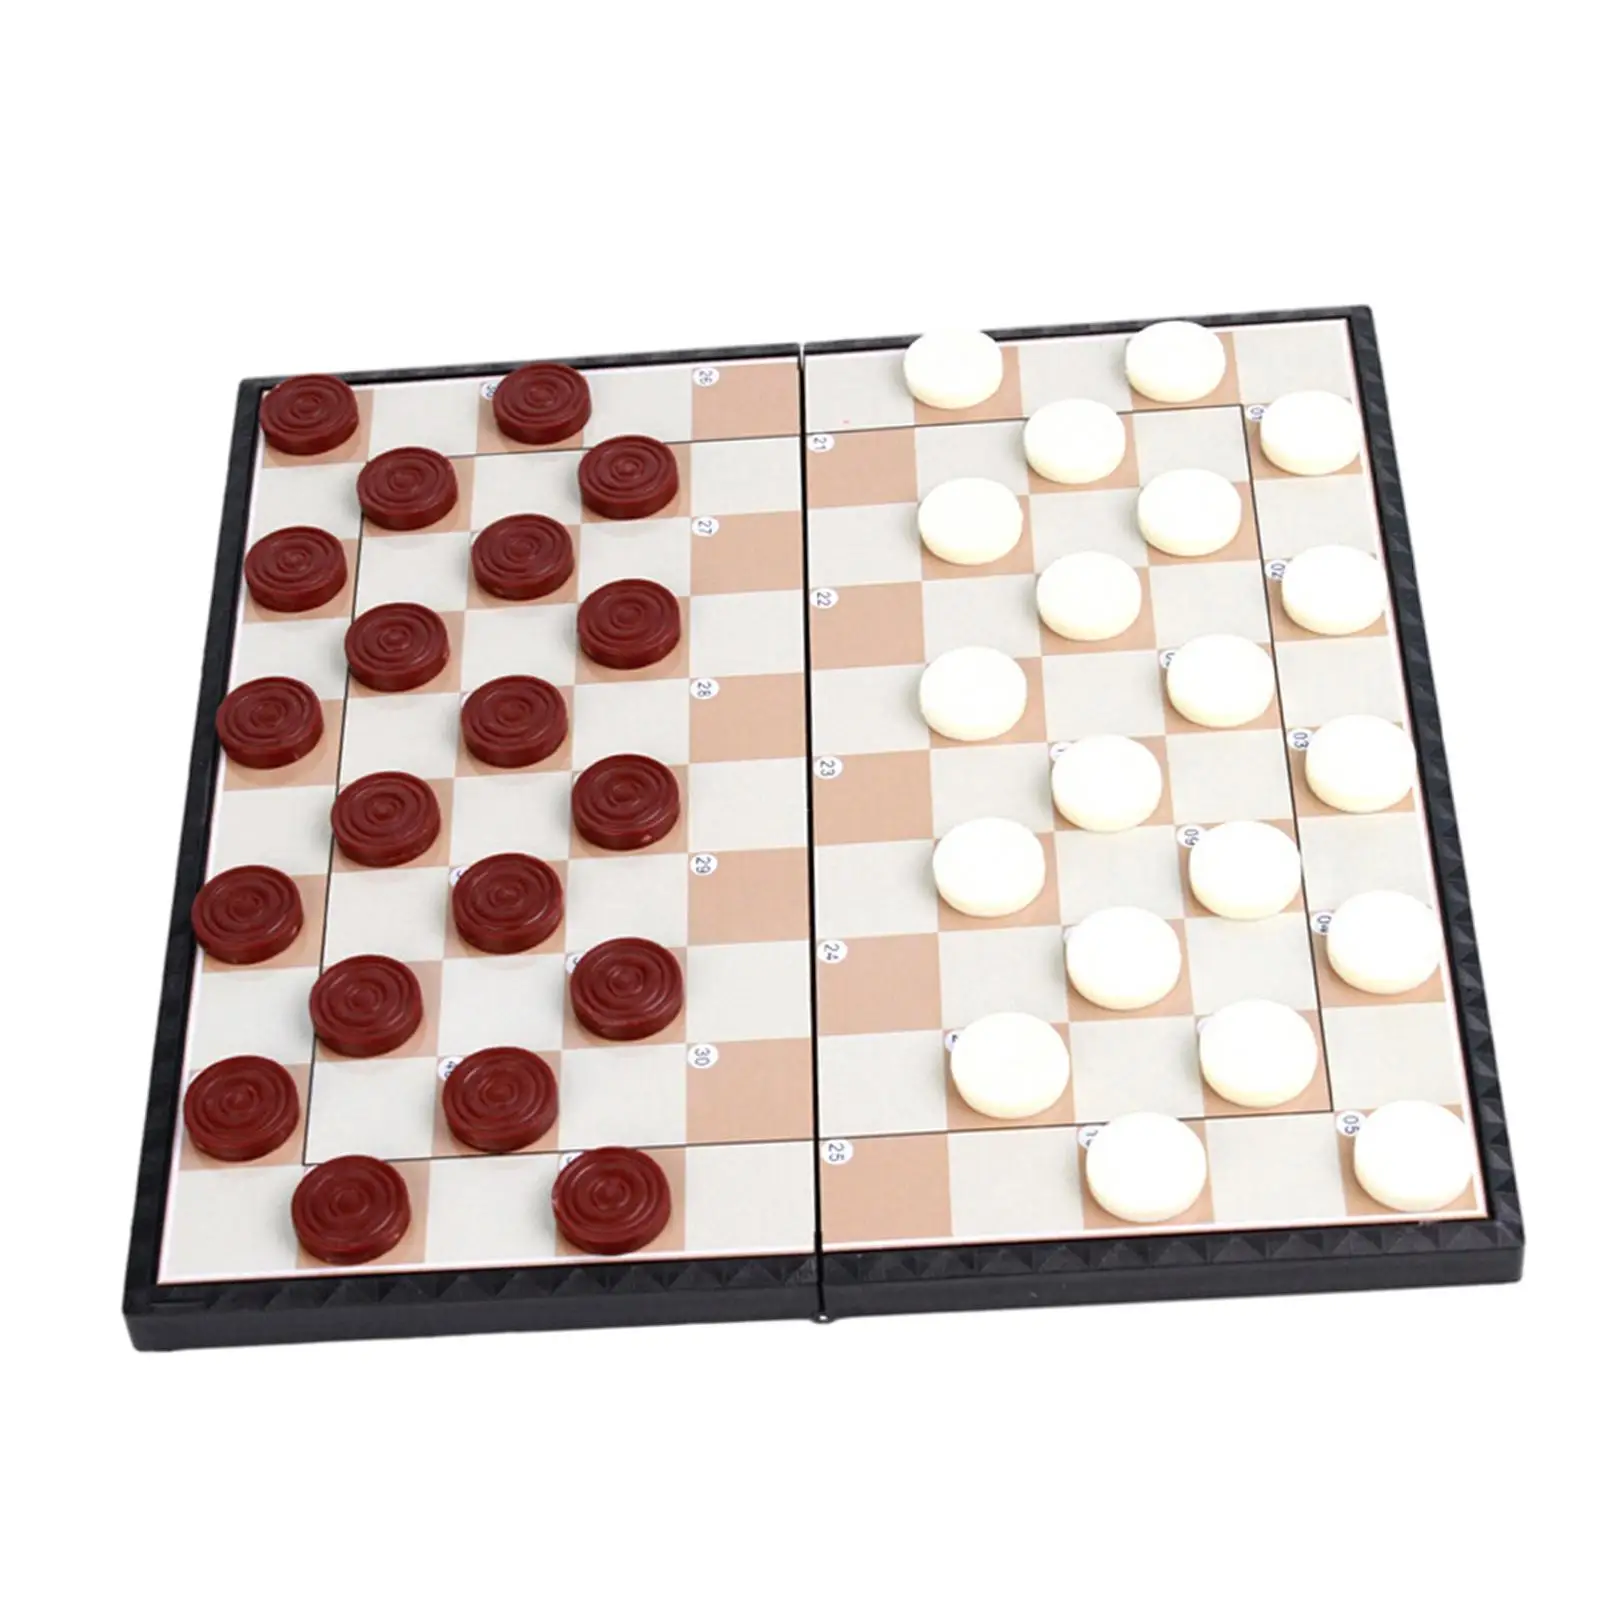 High quality Checkers Board Game Set Educational Toys Traditional for Kids